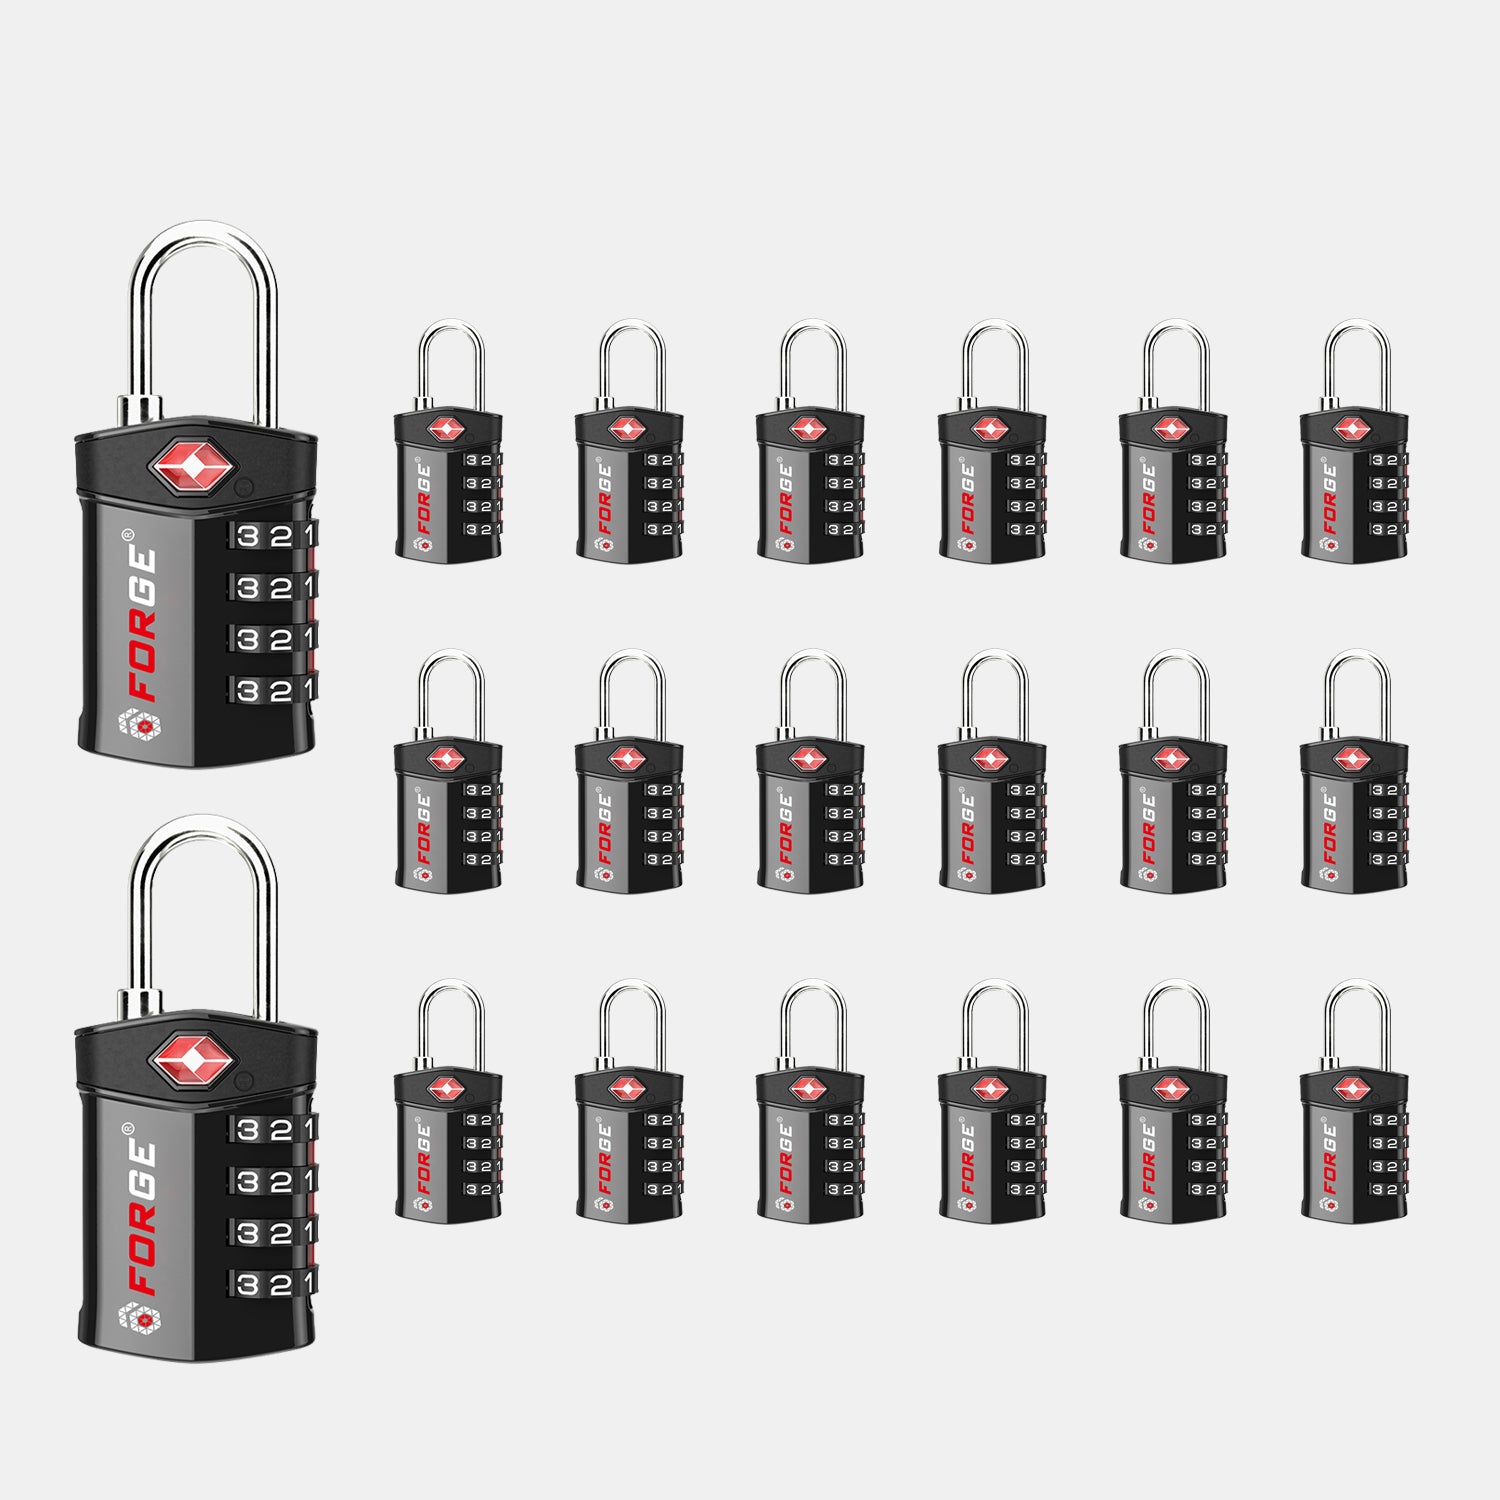 TSA Approved 4-Digit Combination Locks for Luggage and Suitcases. Open Alert, Alloy Body. Black 20 Locks